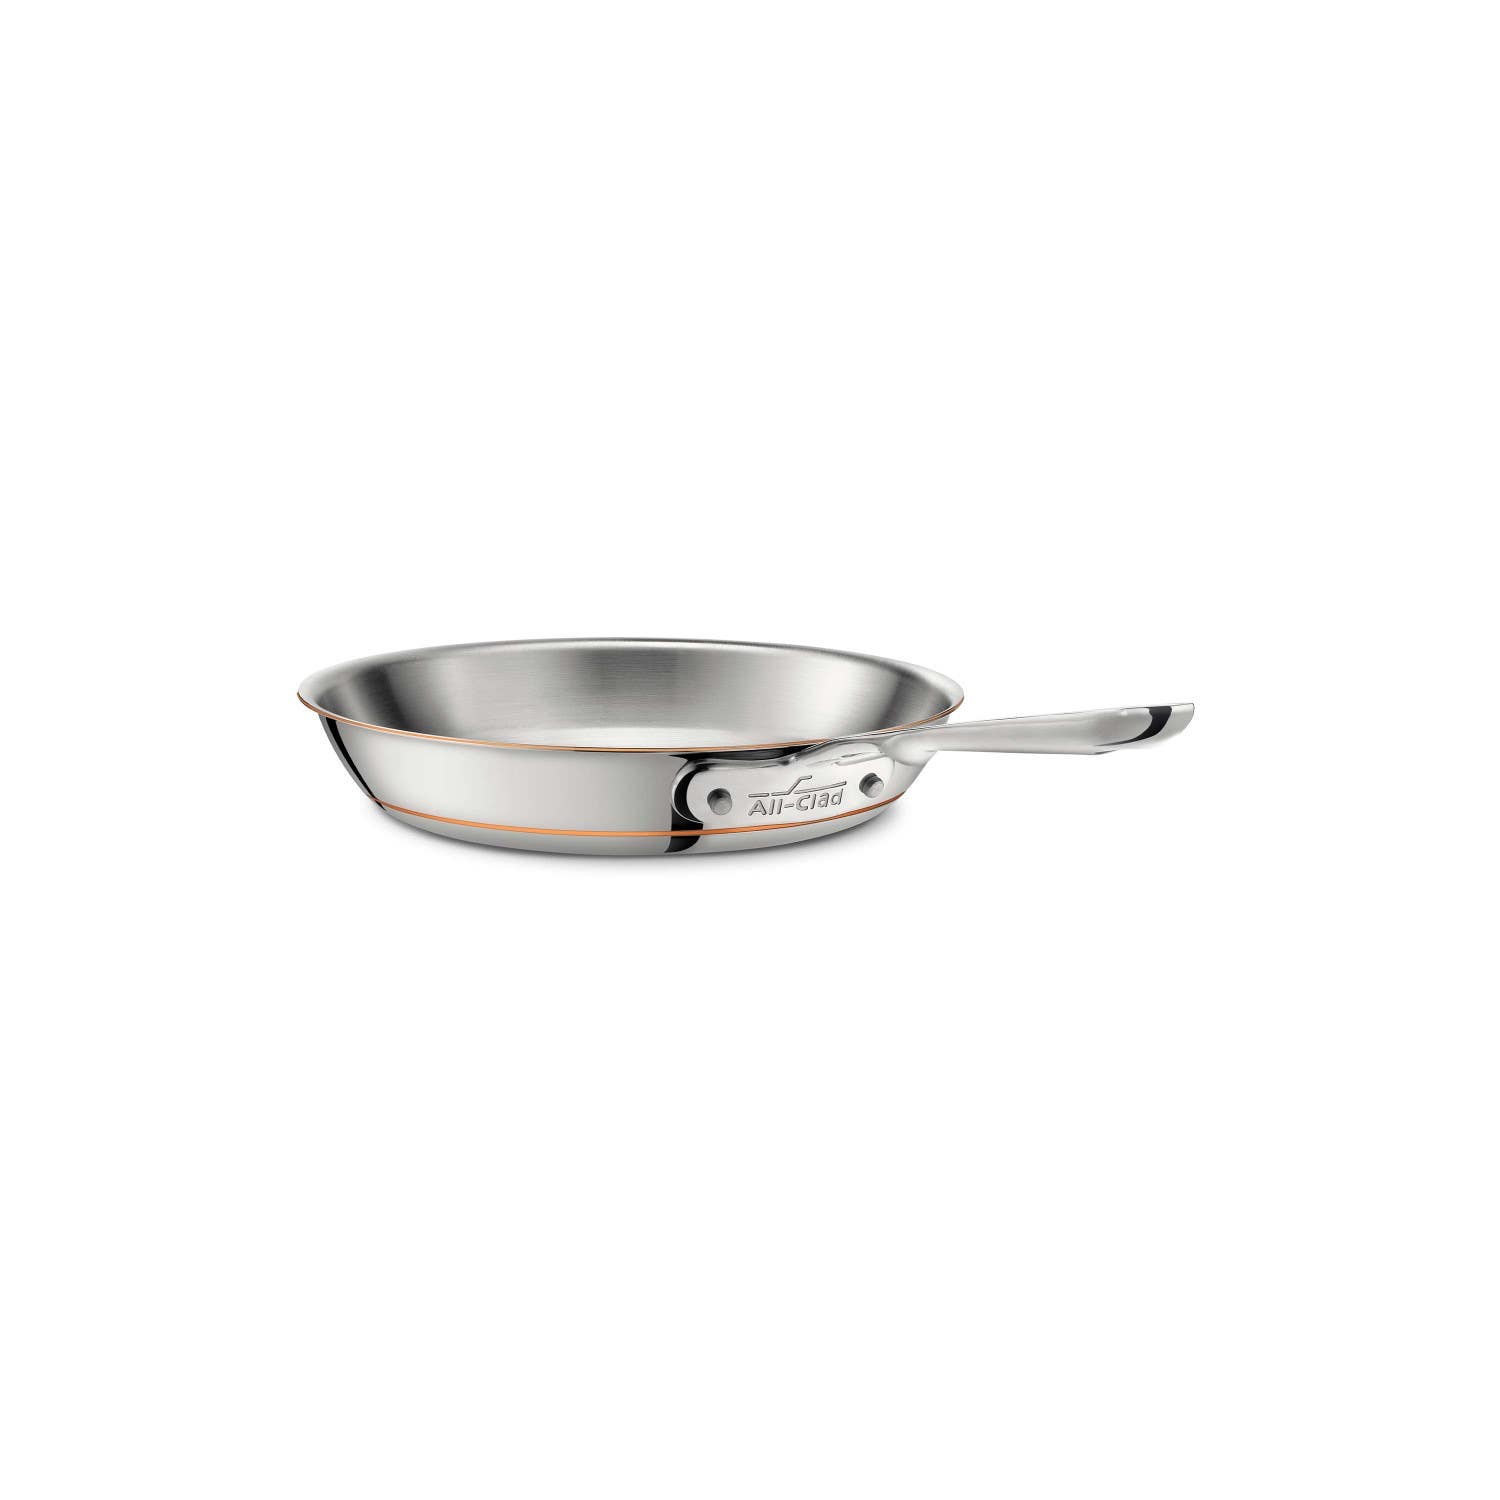 All-clad 8 inch copper center fry pan